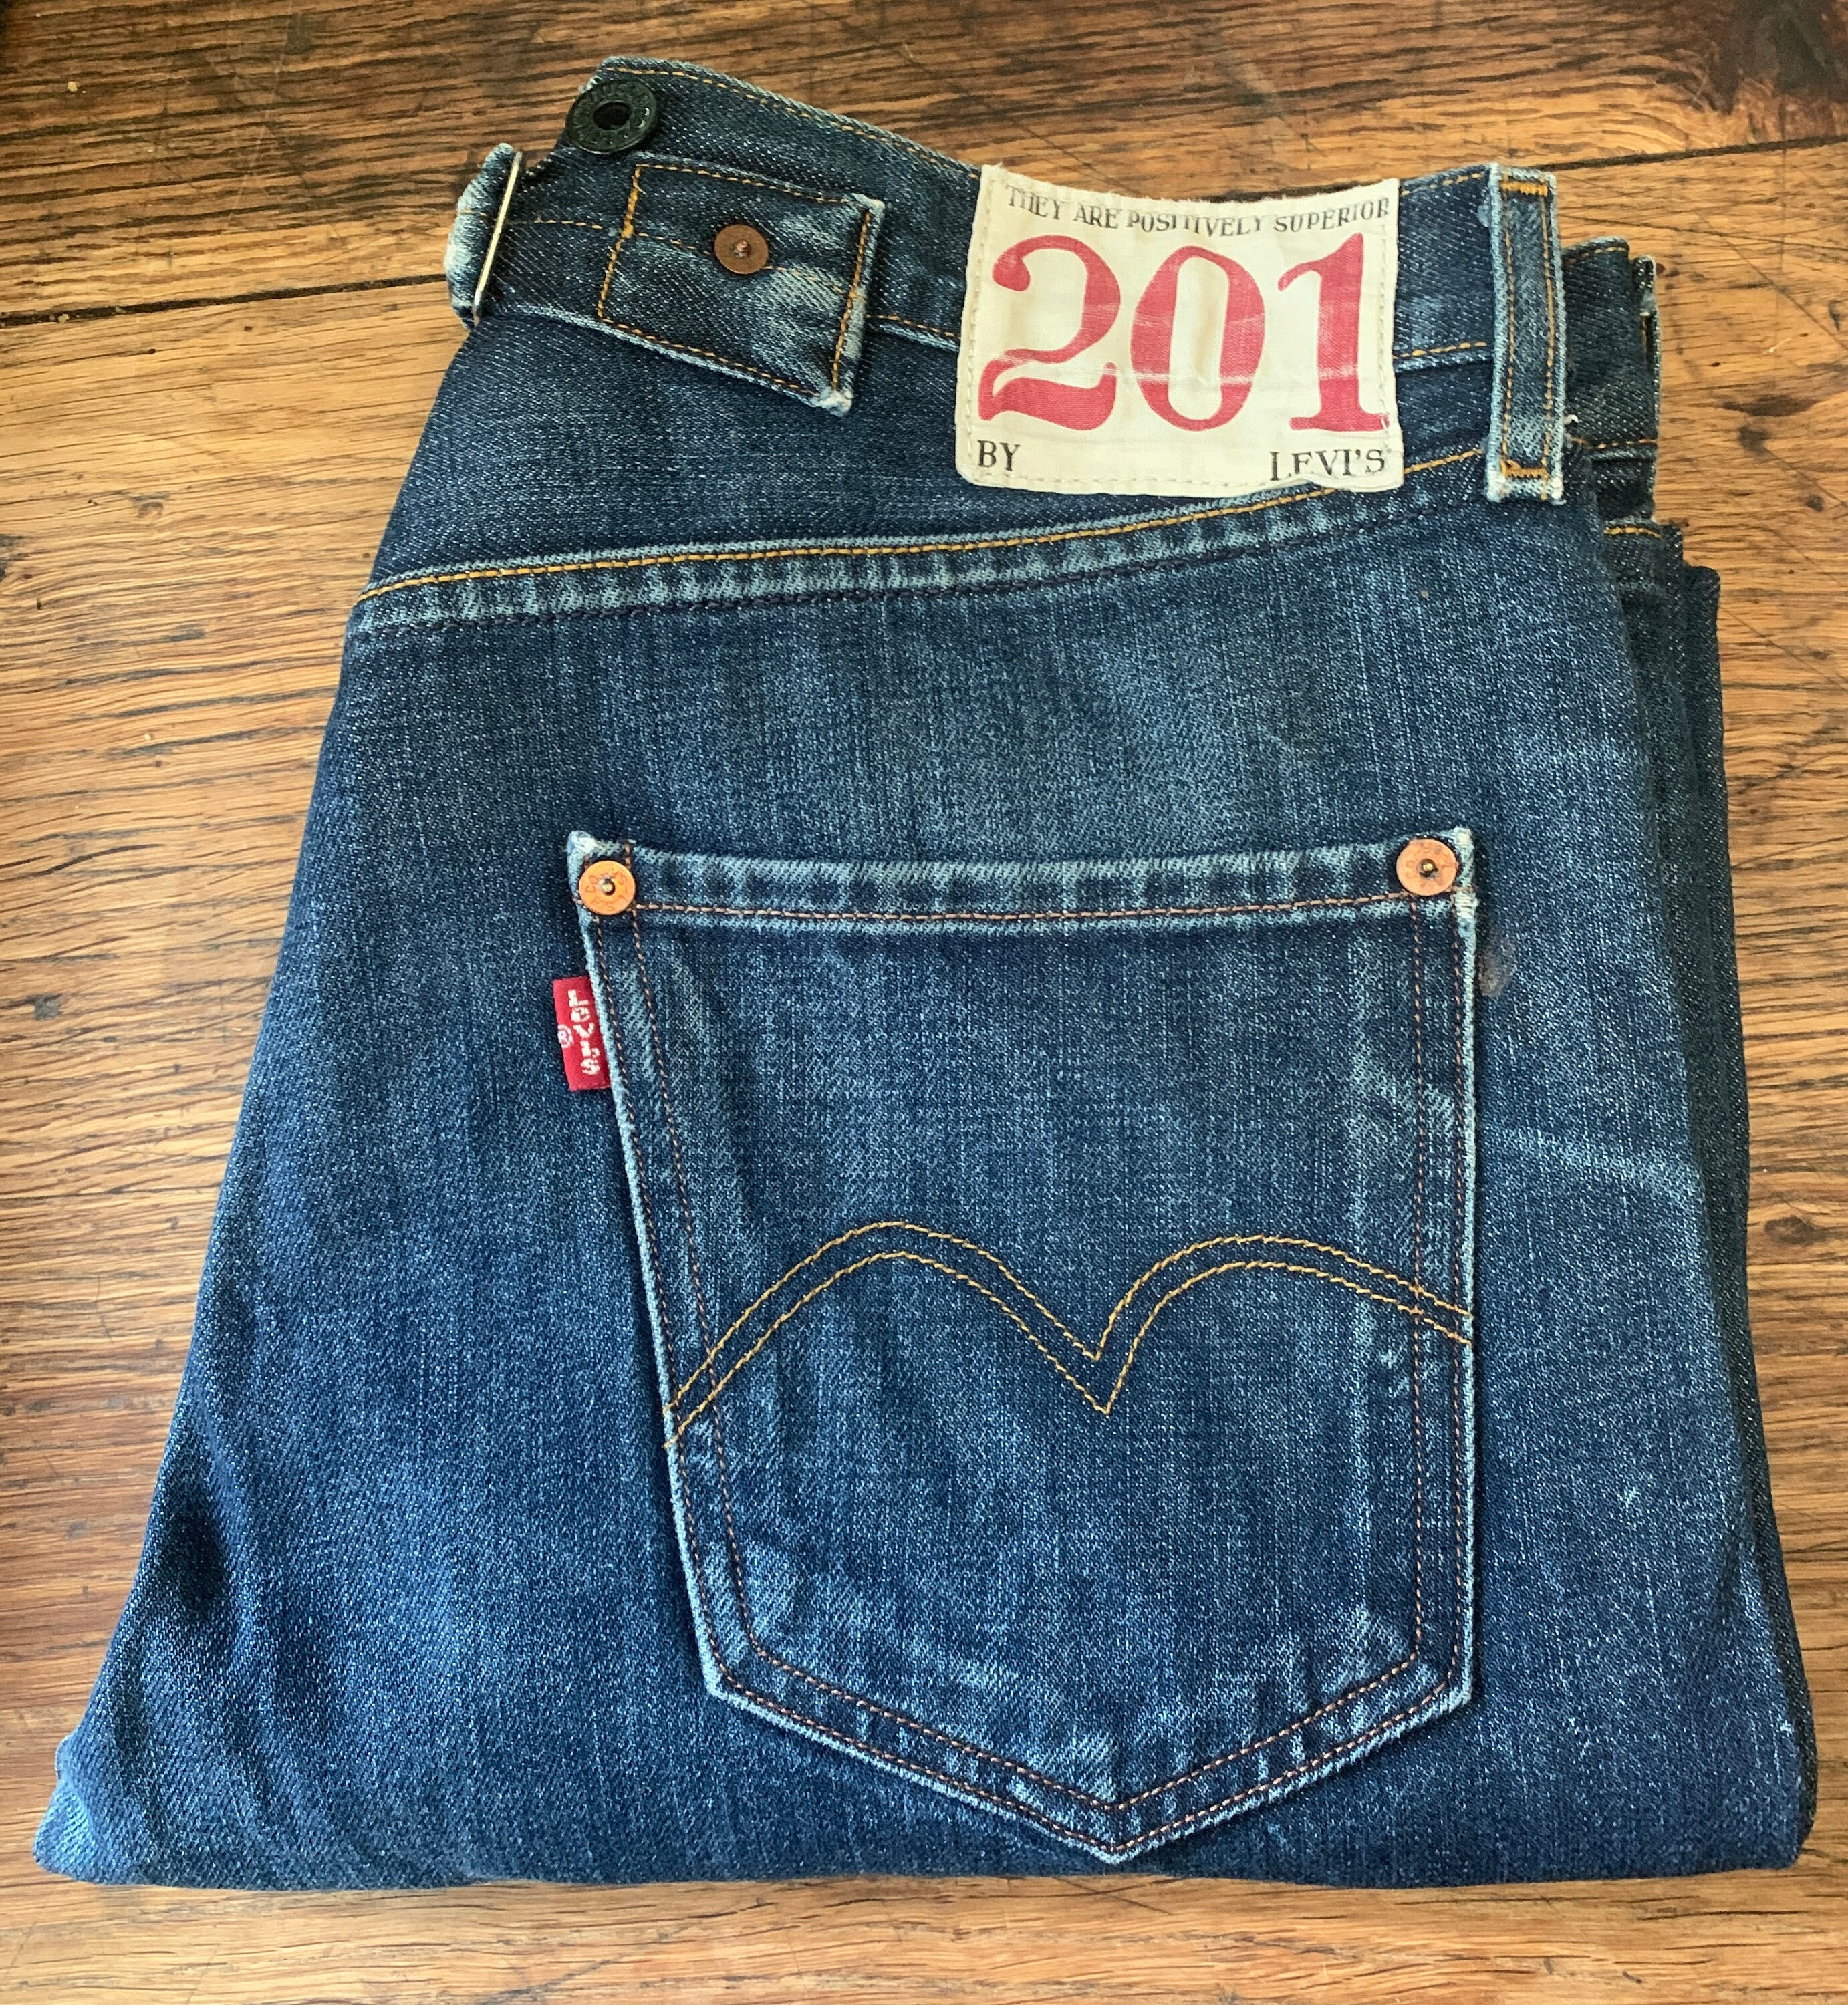 Levi's 201 1890-1901 Repro W29 L32 Actual Size Measured-size Real 